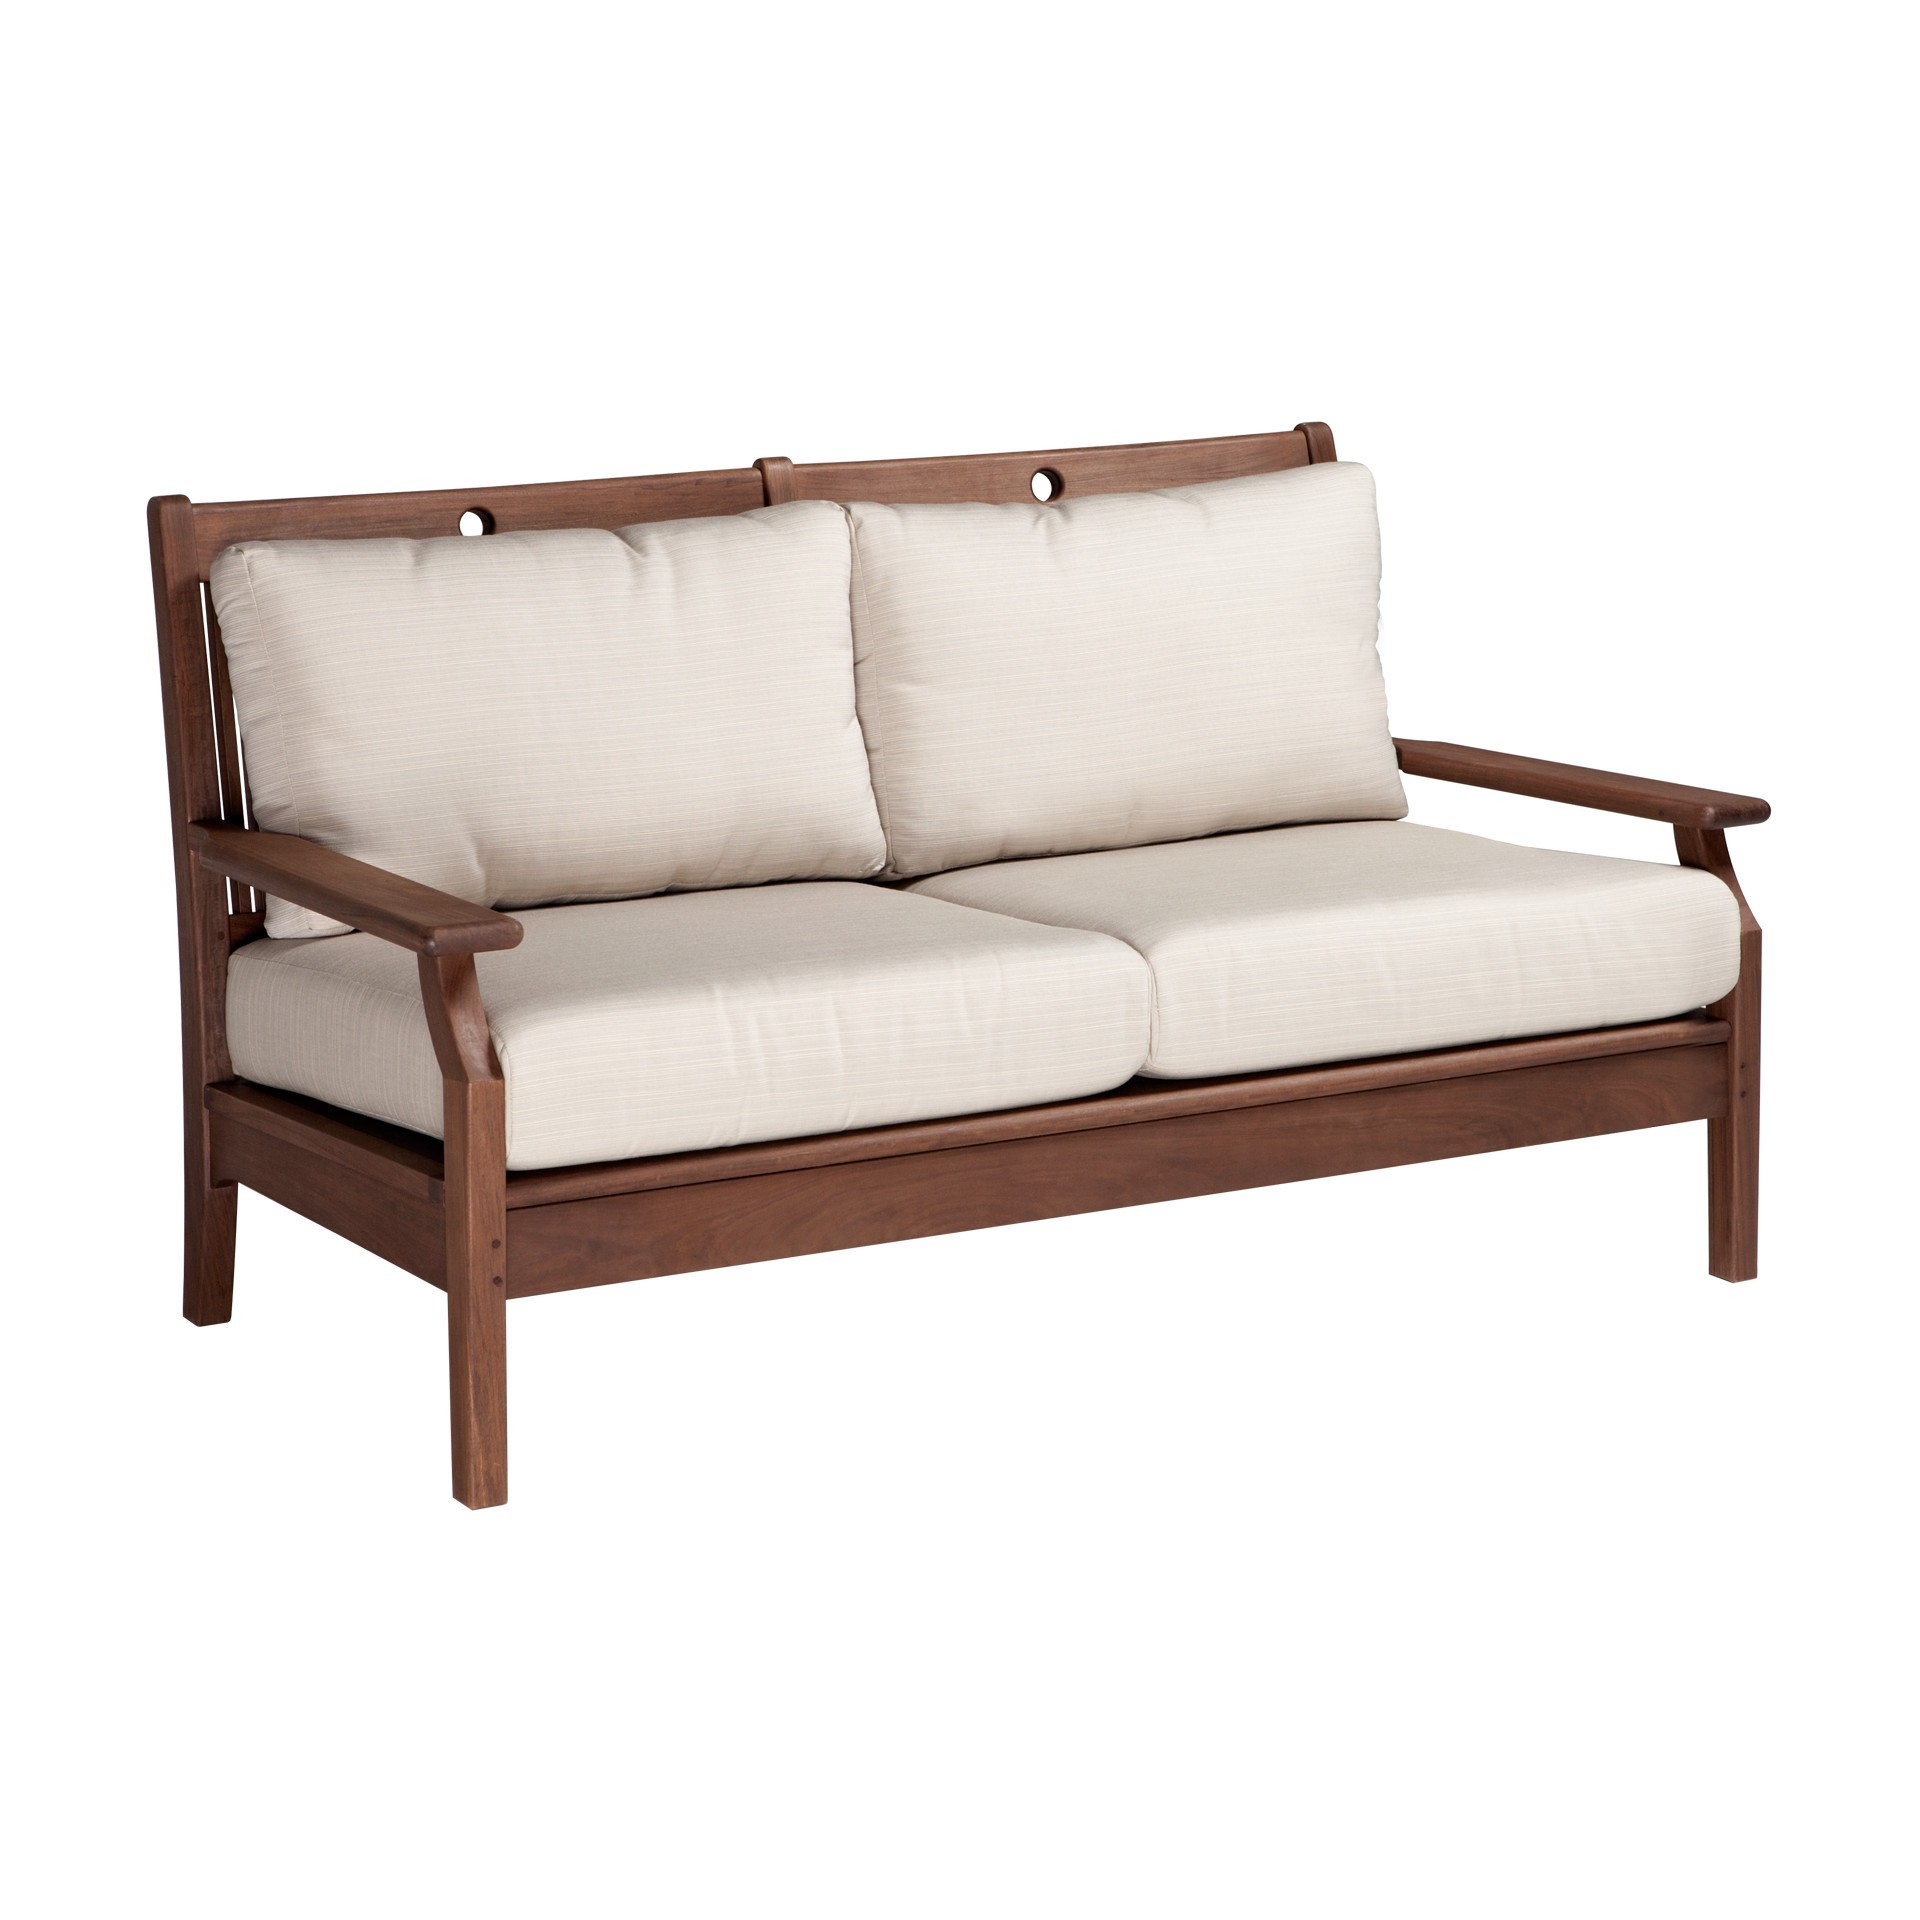 Opal loveseat from hausers patio luxury outdoor living by hausers patio